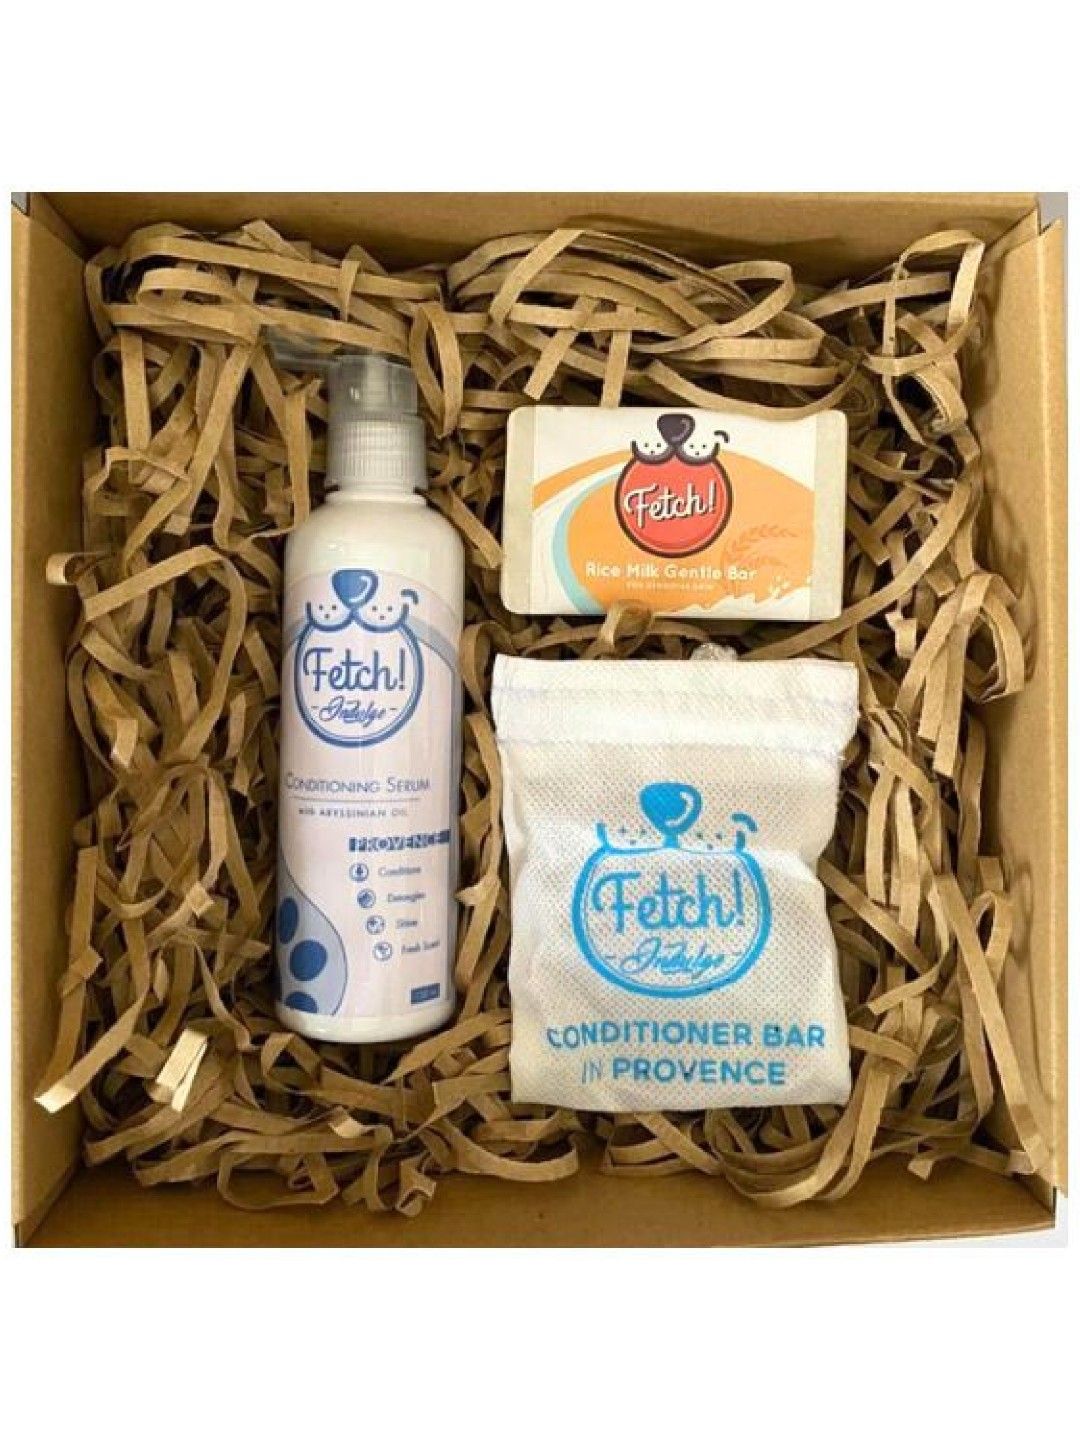 Fetch! Naturals Purr-fect Pamper Kit: Soothe and Floof